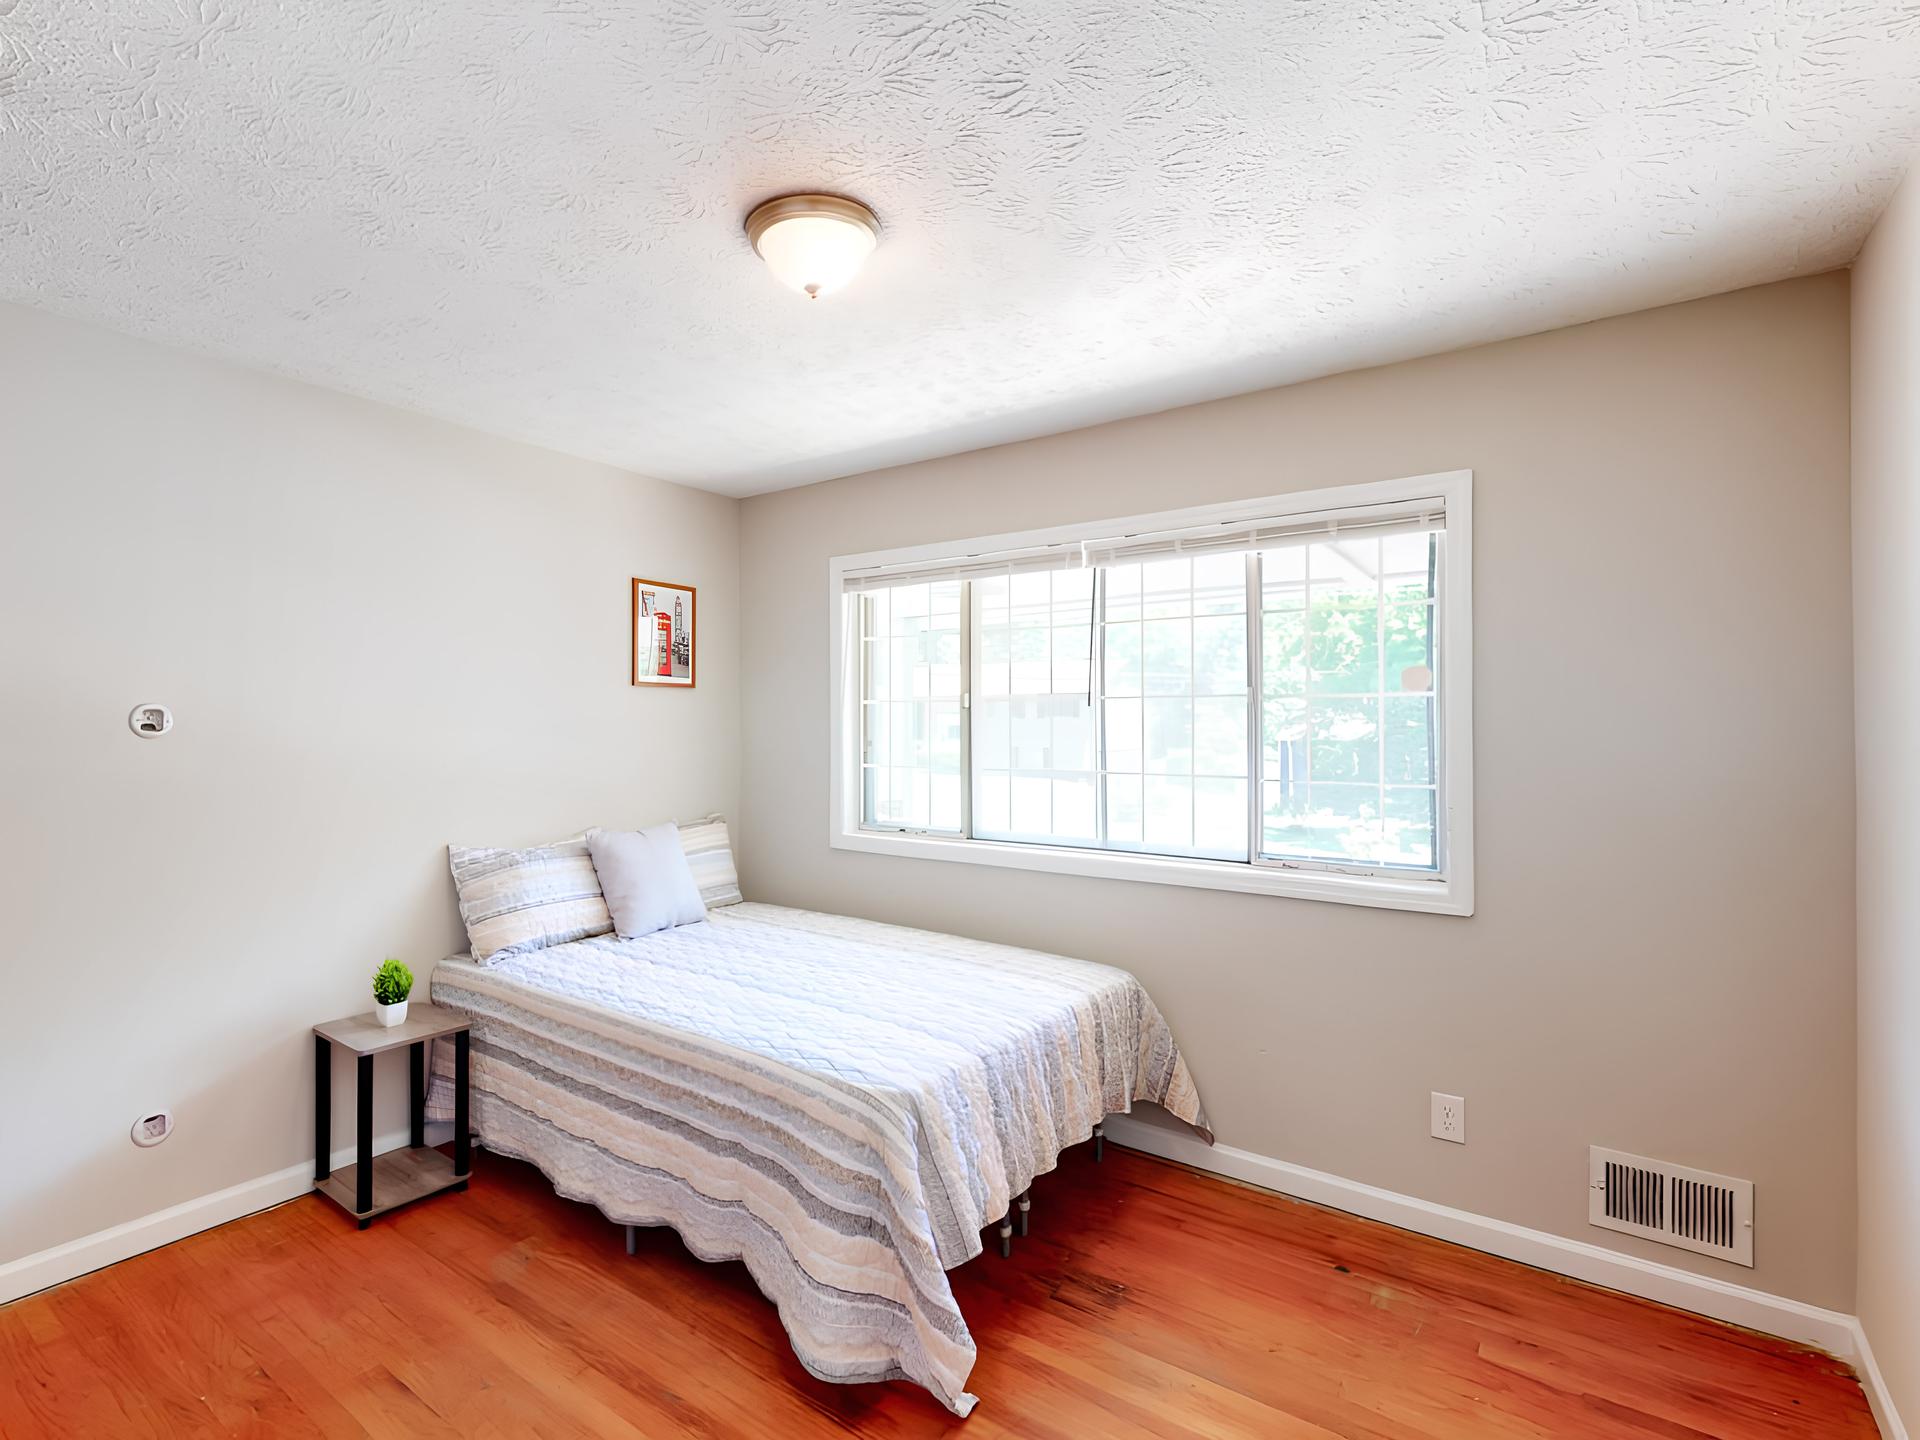 on the top floor, full-bed, with wide street view window. Across from the kitchen. Room size of 11'6"x10'5"